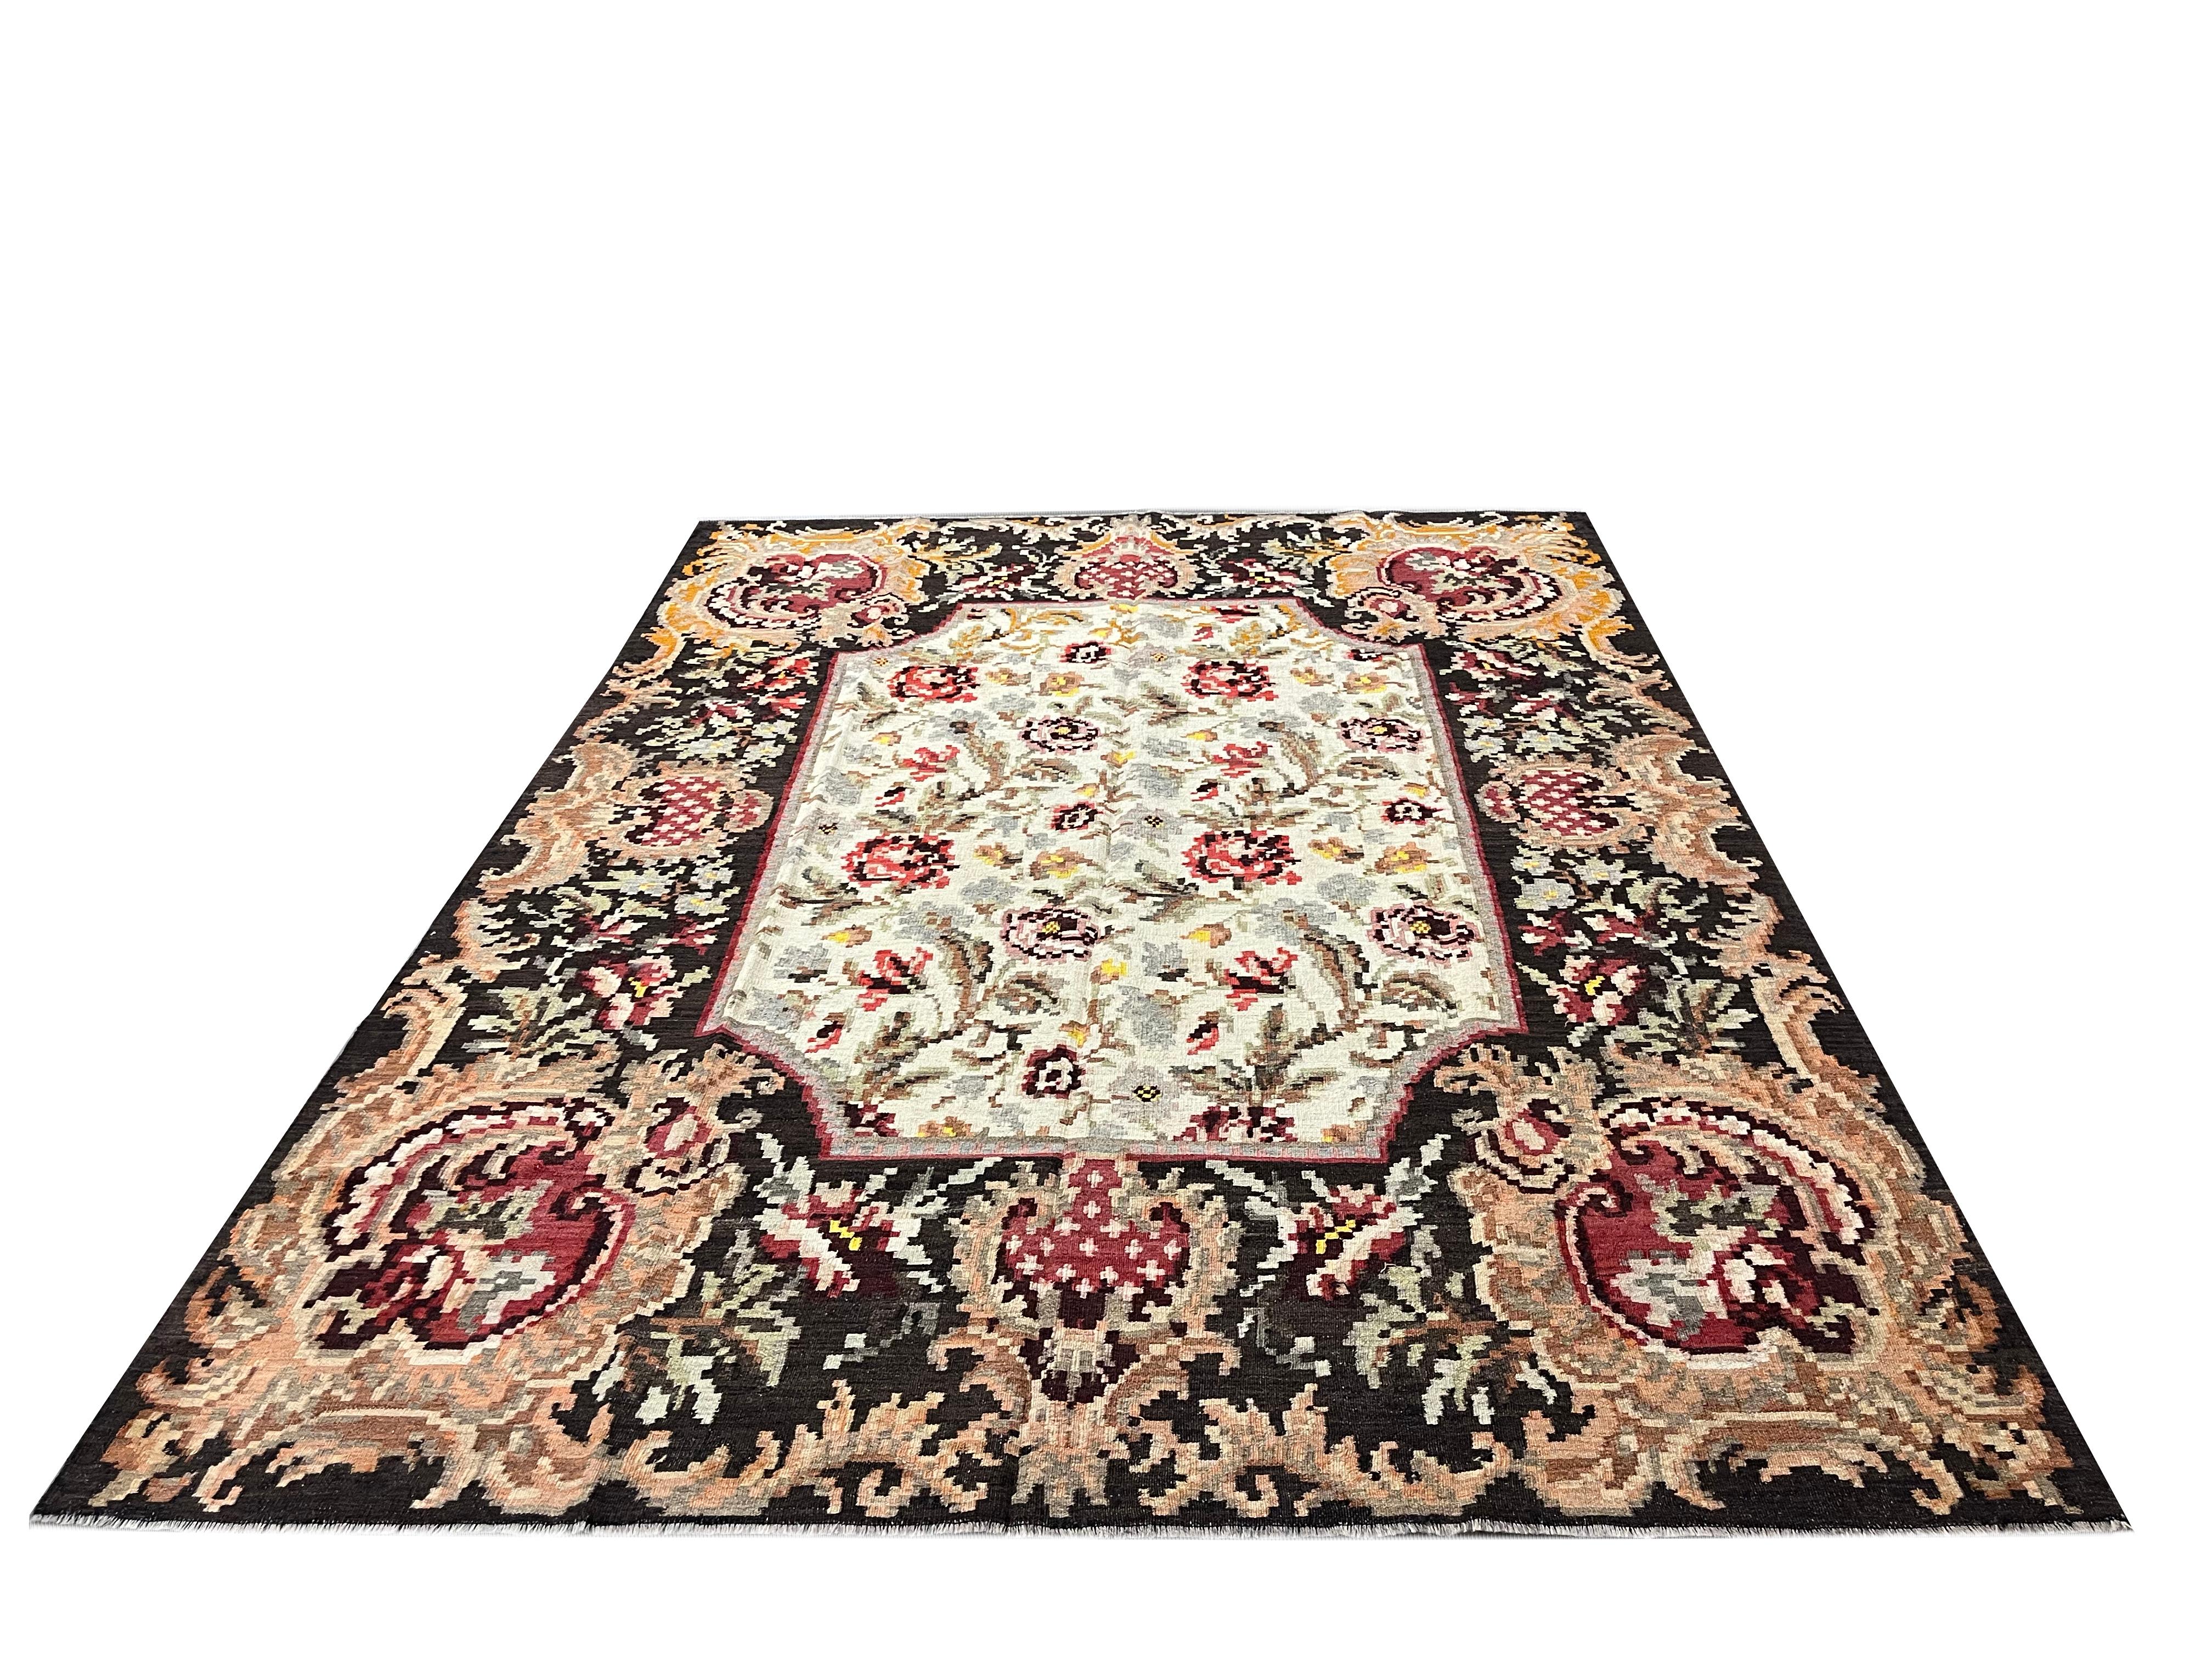 This beautiful handwoven kilim rug is a traditional Moldovian area rug woven in the 1920s. The rustic colour palette includes an array of colours including accents of red, beige, yellow and rust that make up the intricate floral design. The colours